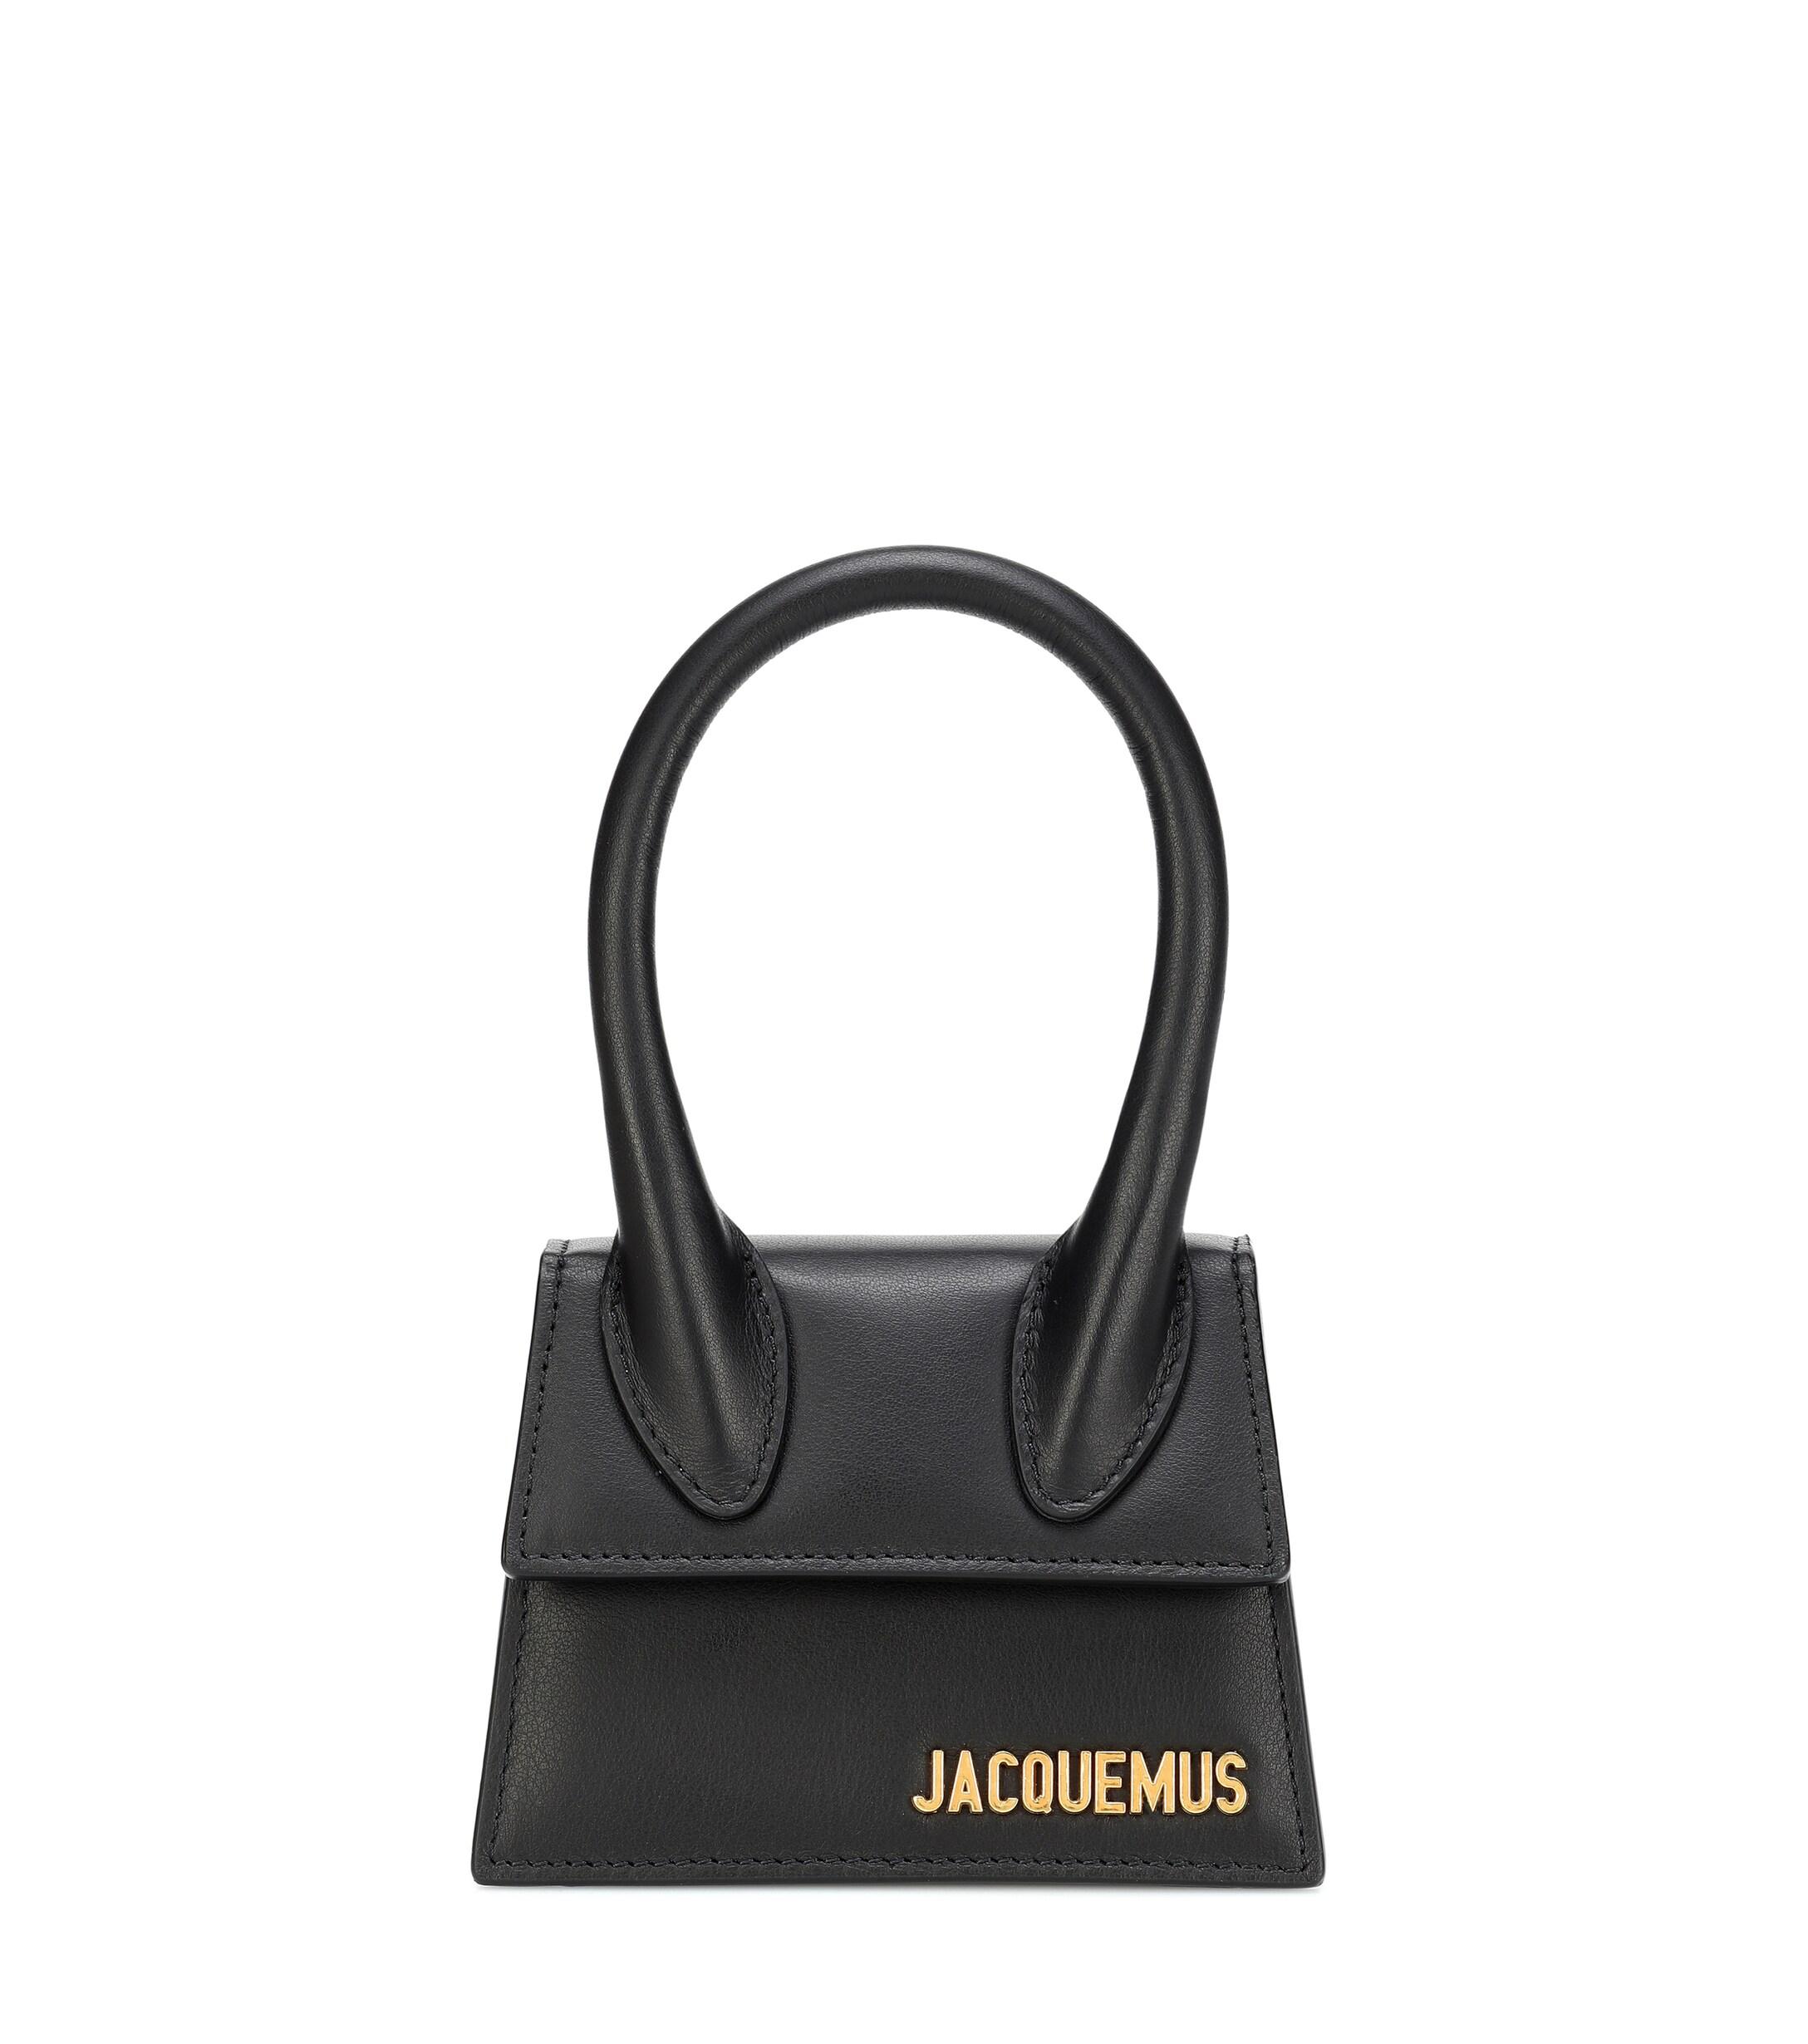 Jacquemus Le Chiquito Leather Tote in Black - Lyst